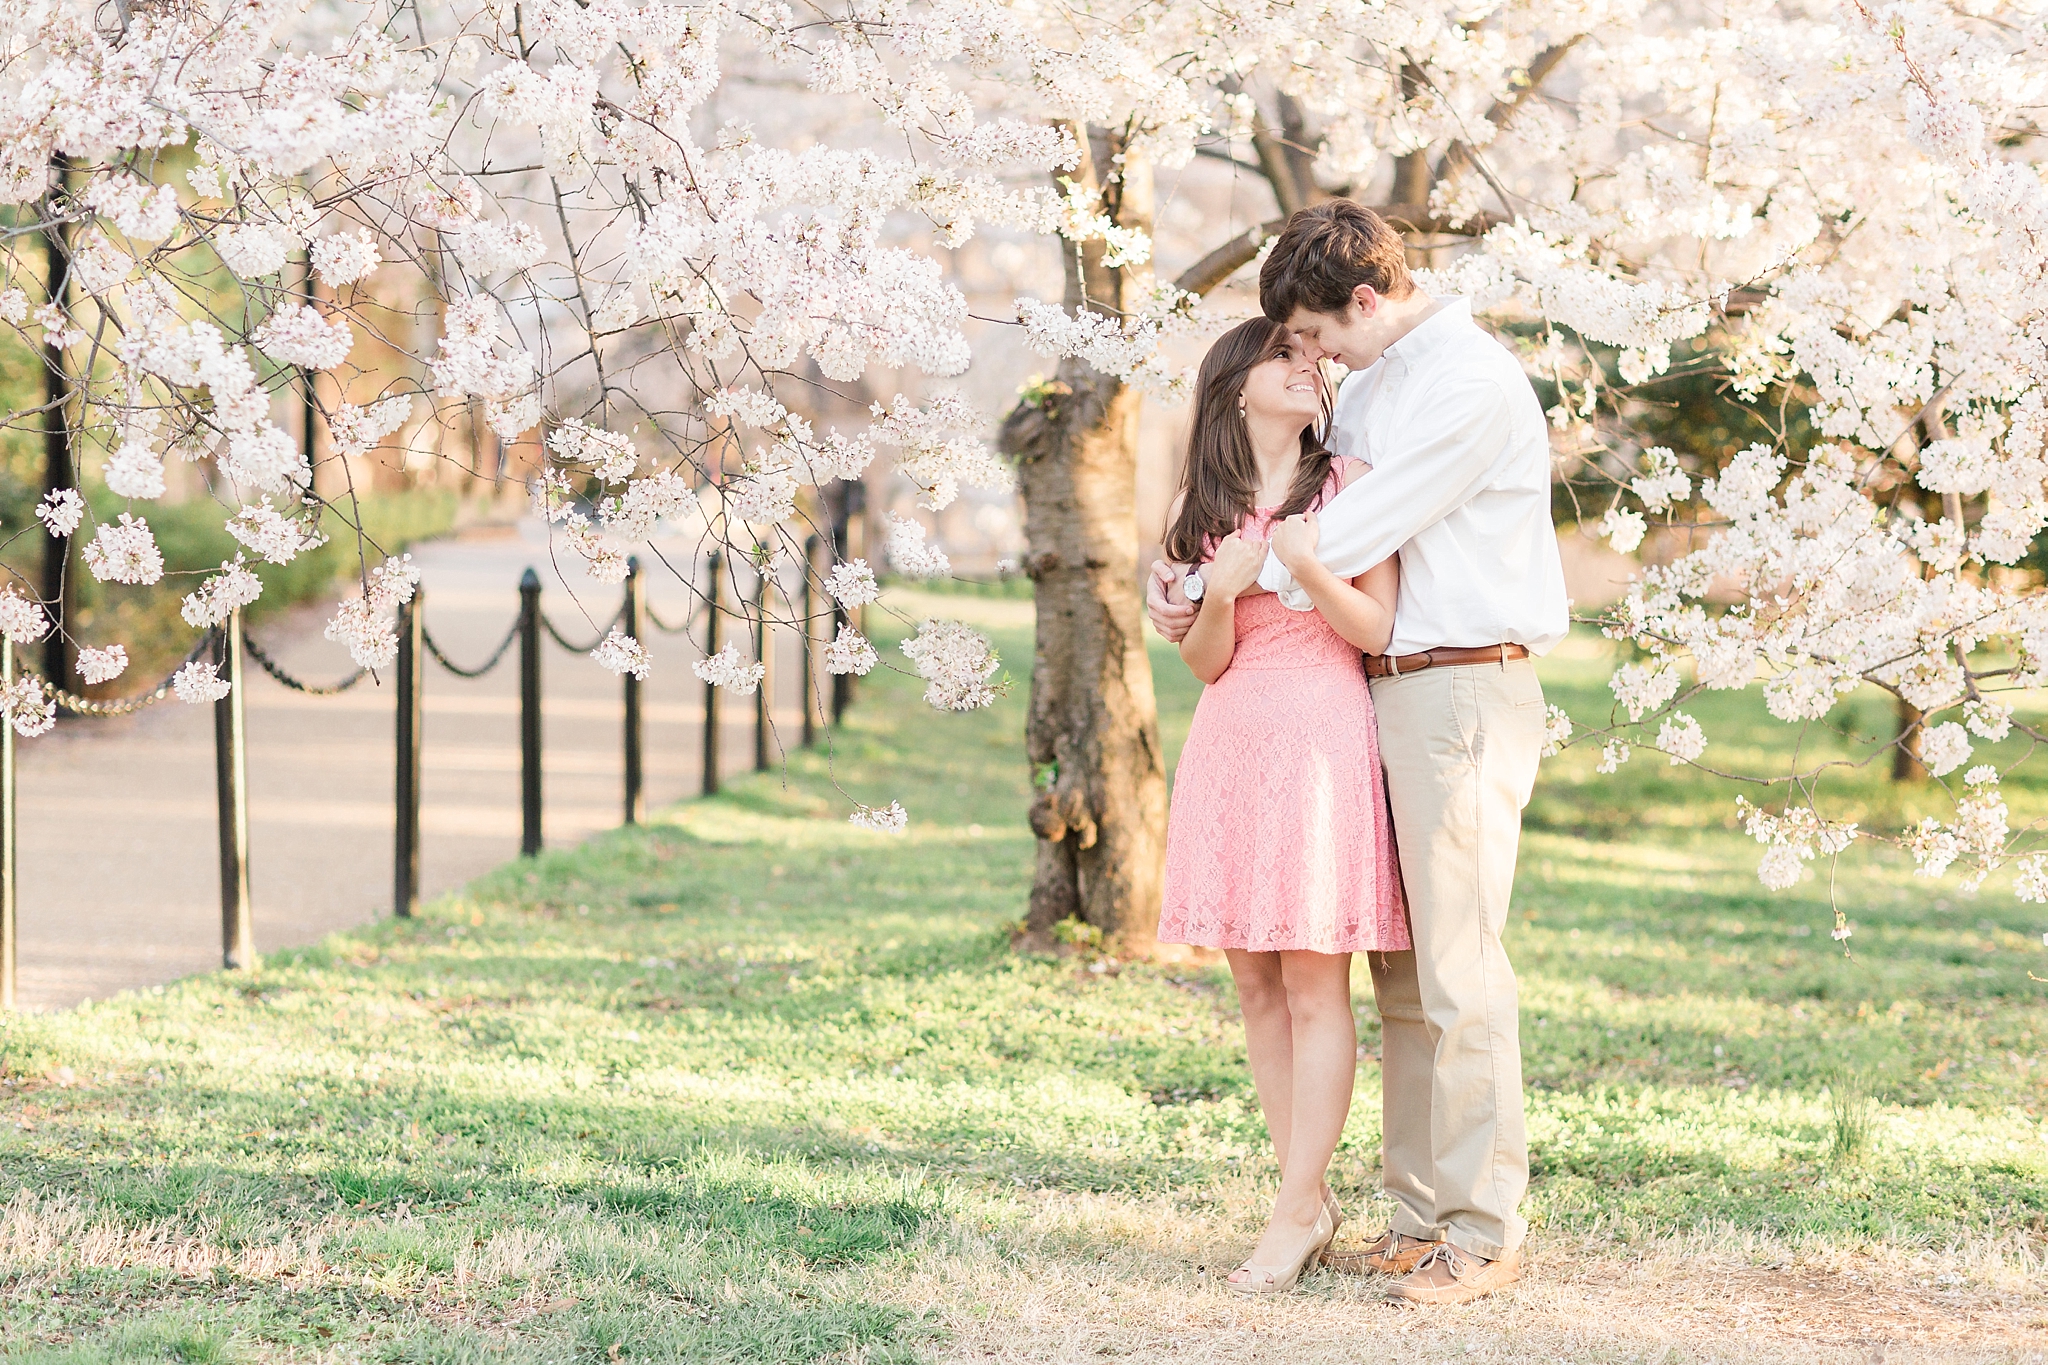 Choosing an engagement session location isn't always easy, so this Washington, DC wedding photographer shares a few tips on how to select the perfect spot! 